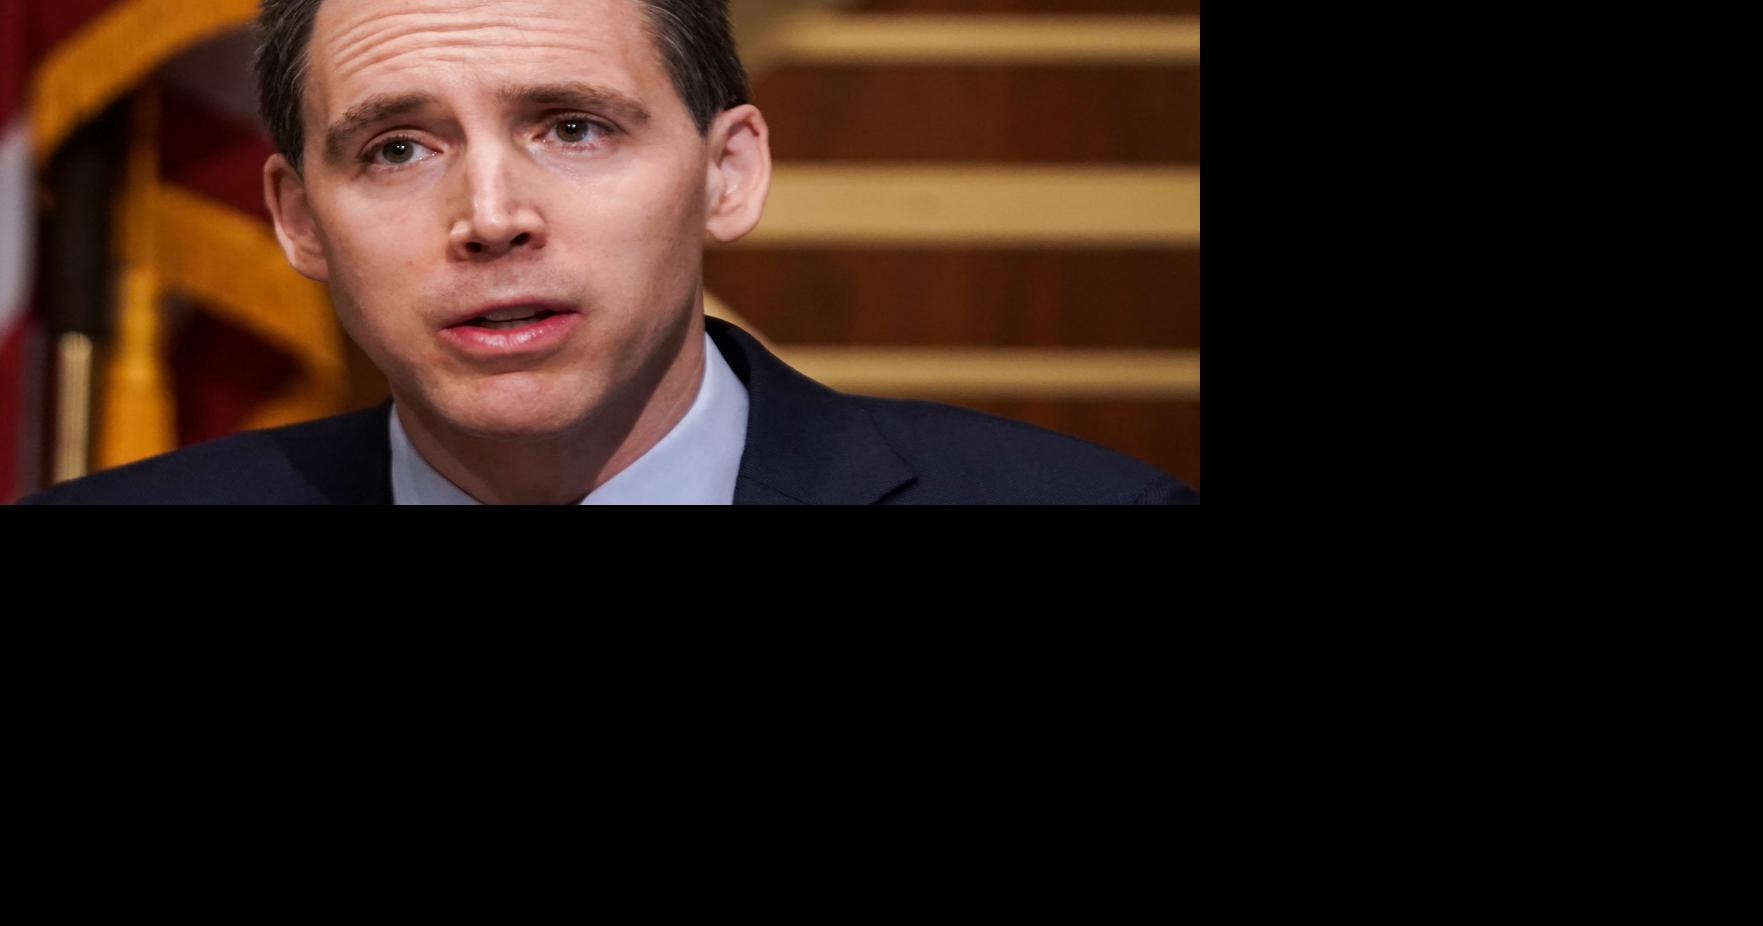 Missouri taxpayers might have to pay $300,000 for open records violation under Hawley